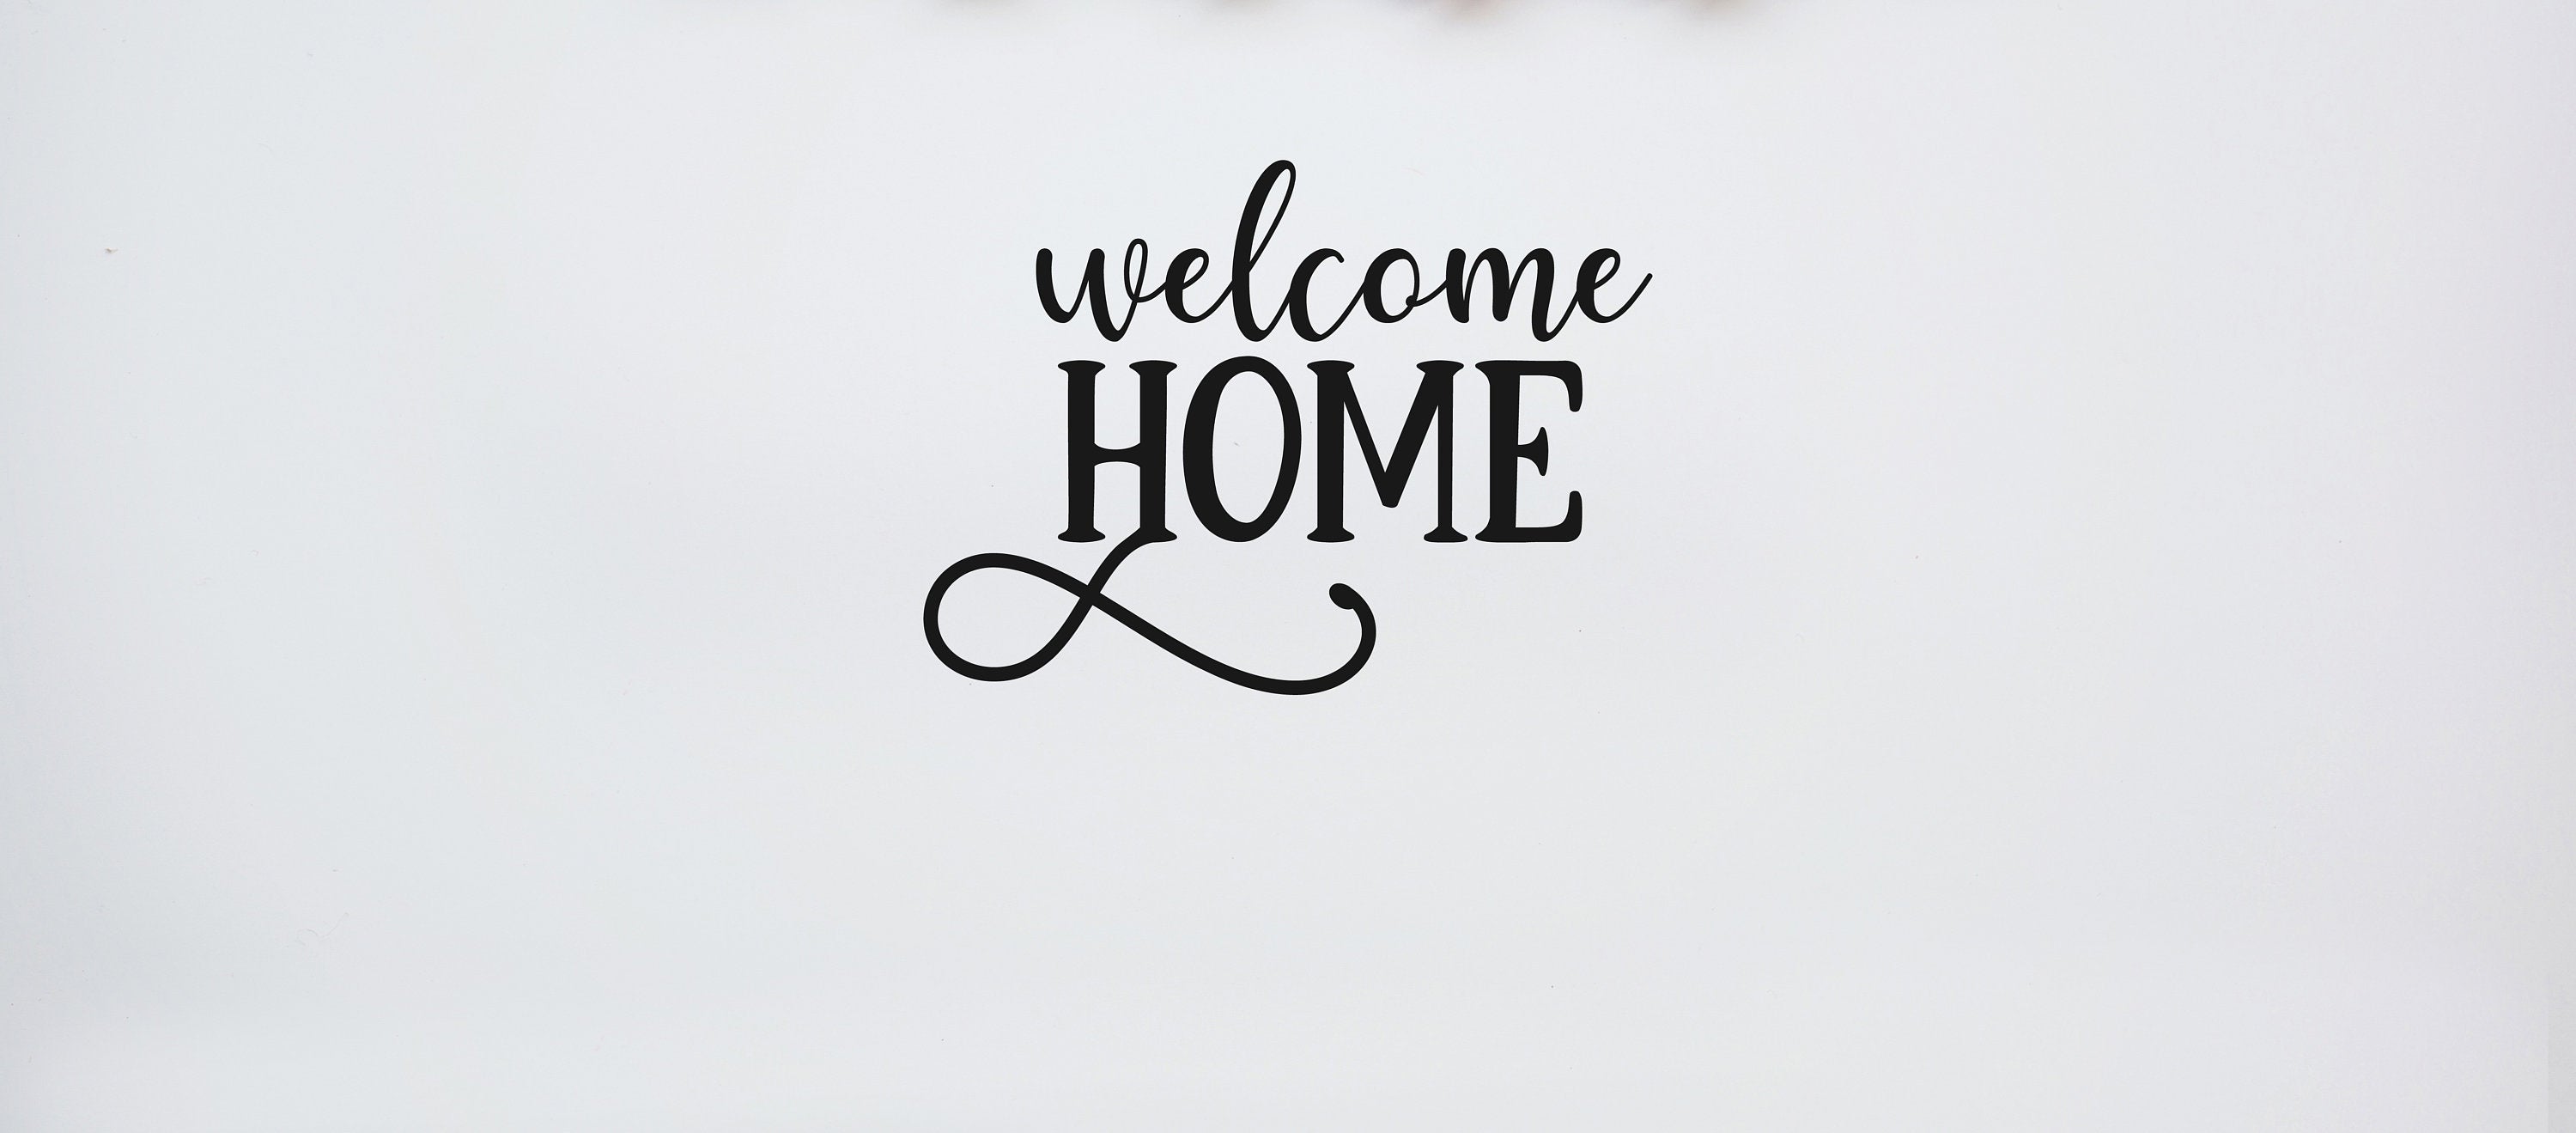 Welcome Home - Vinyl Wall Decal - Home Decor for Walls, Doors, Entryway, Great as Housewarming Gift or Present,